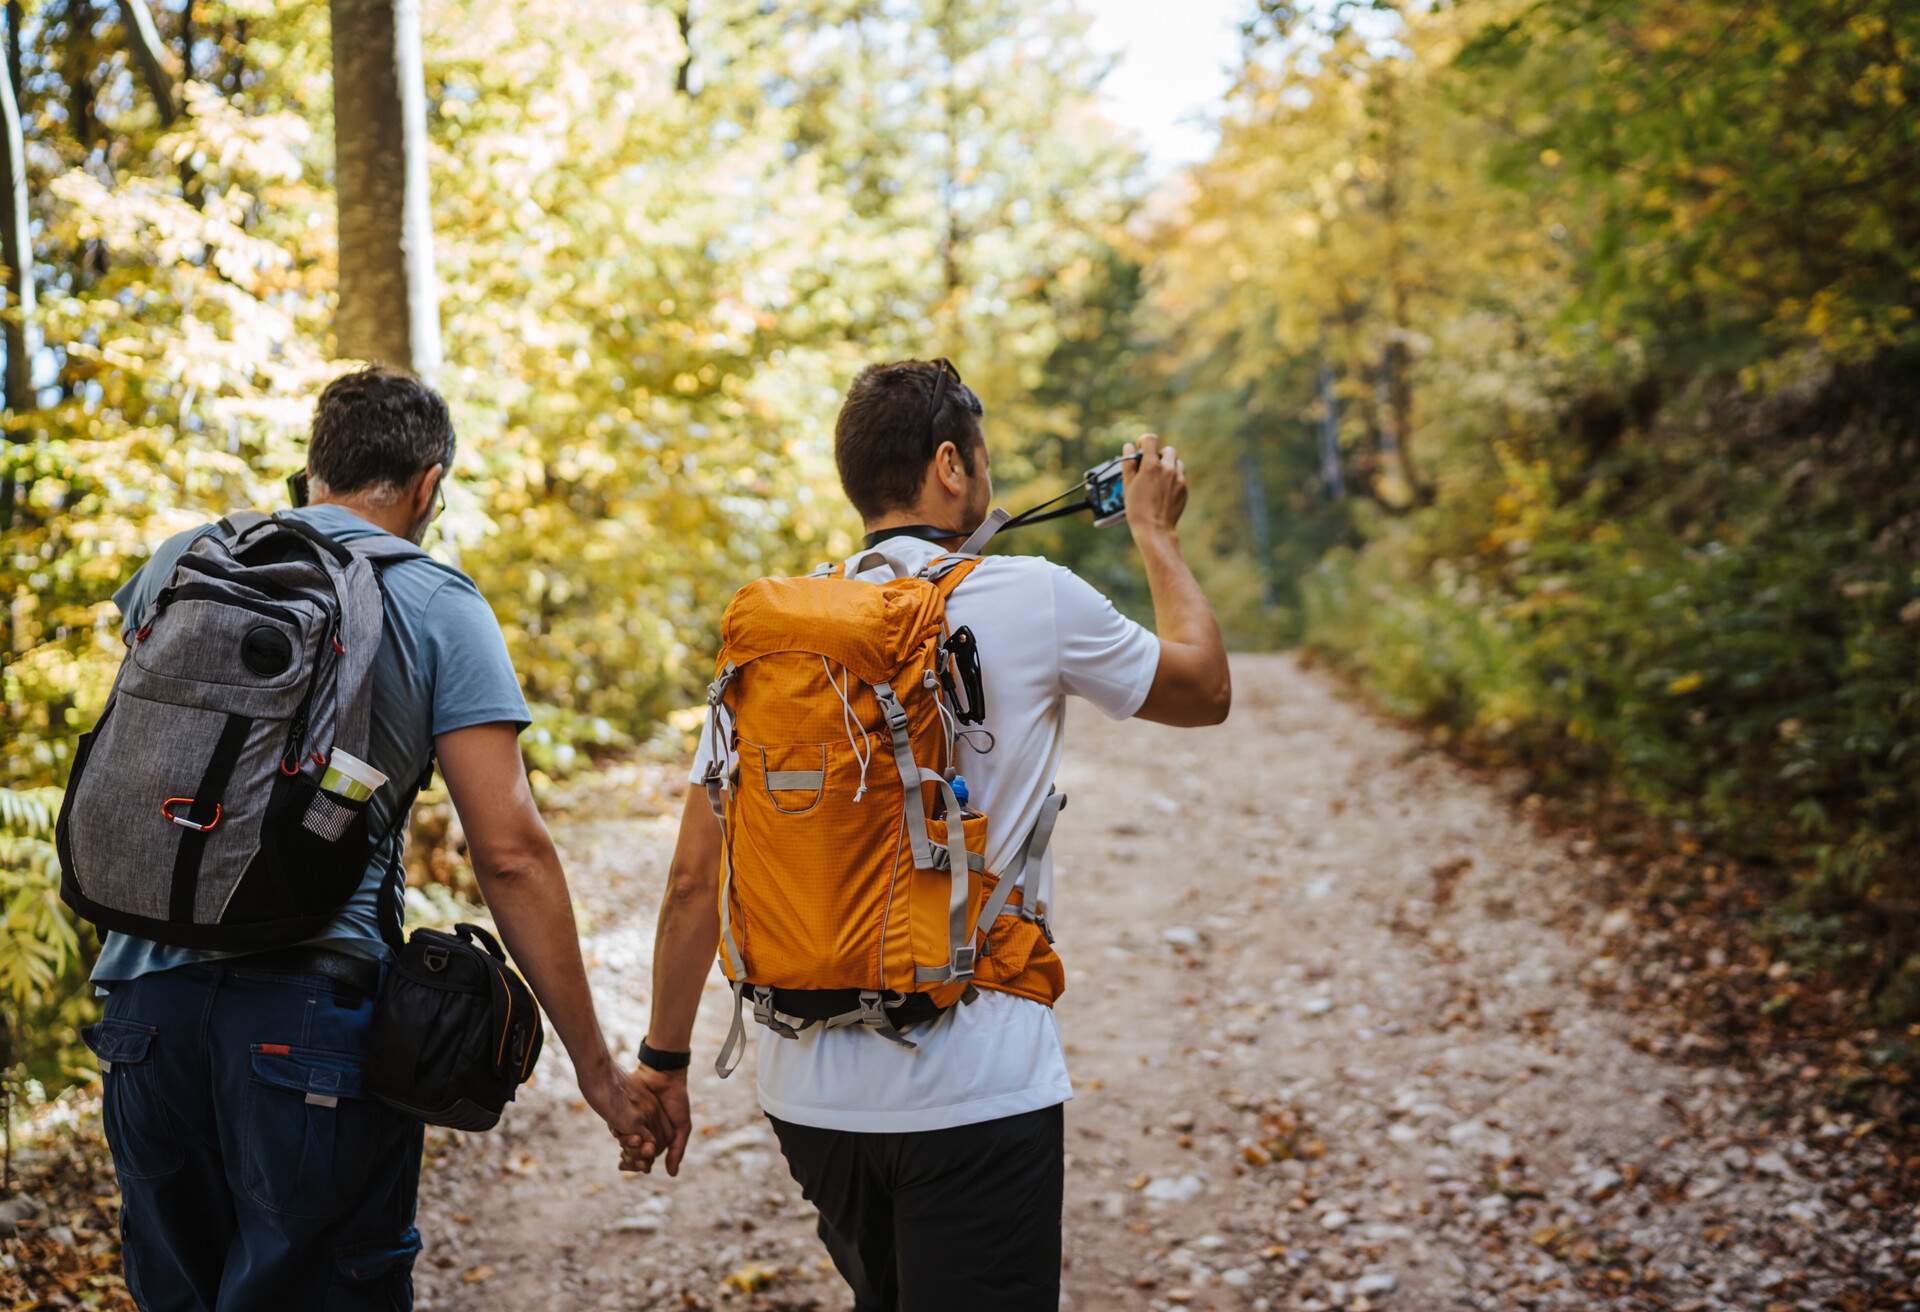 Male backpackers hiking in the woods while holding hands, one holding a camera and taking photos.